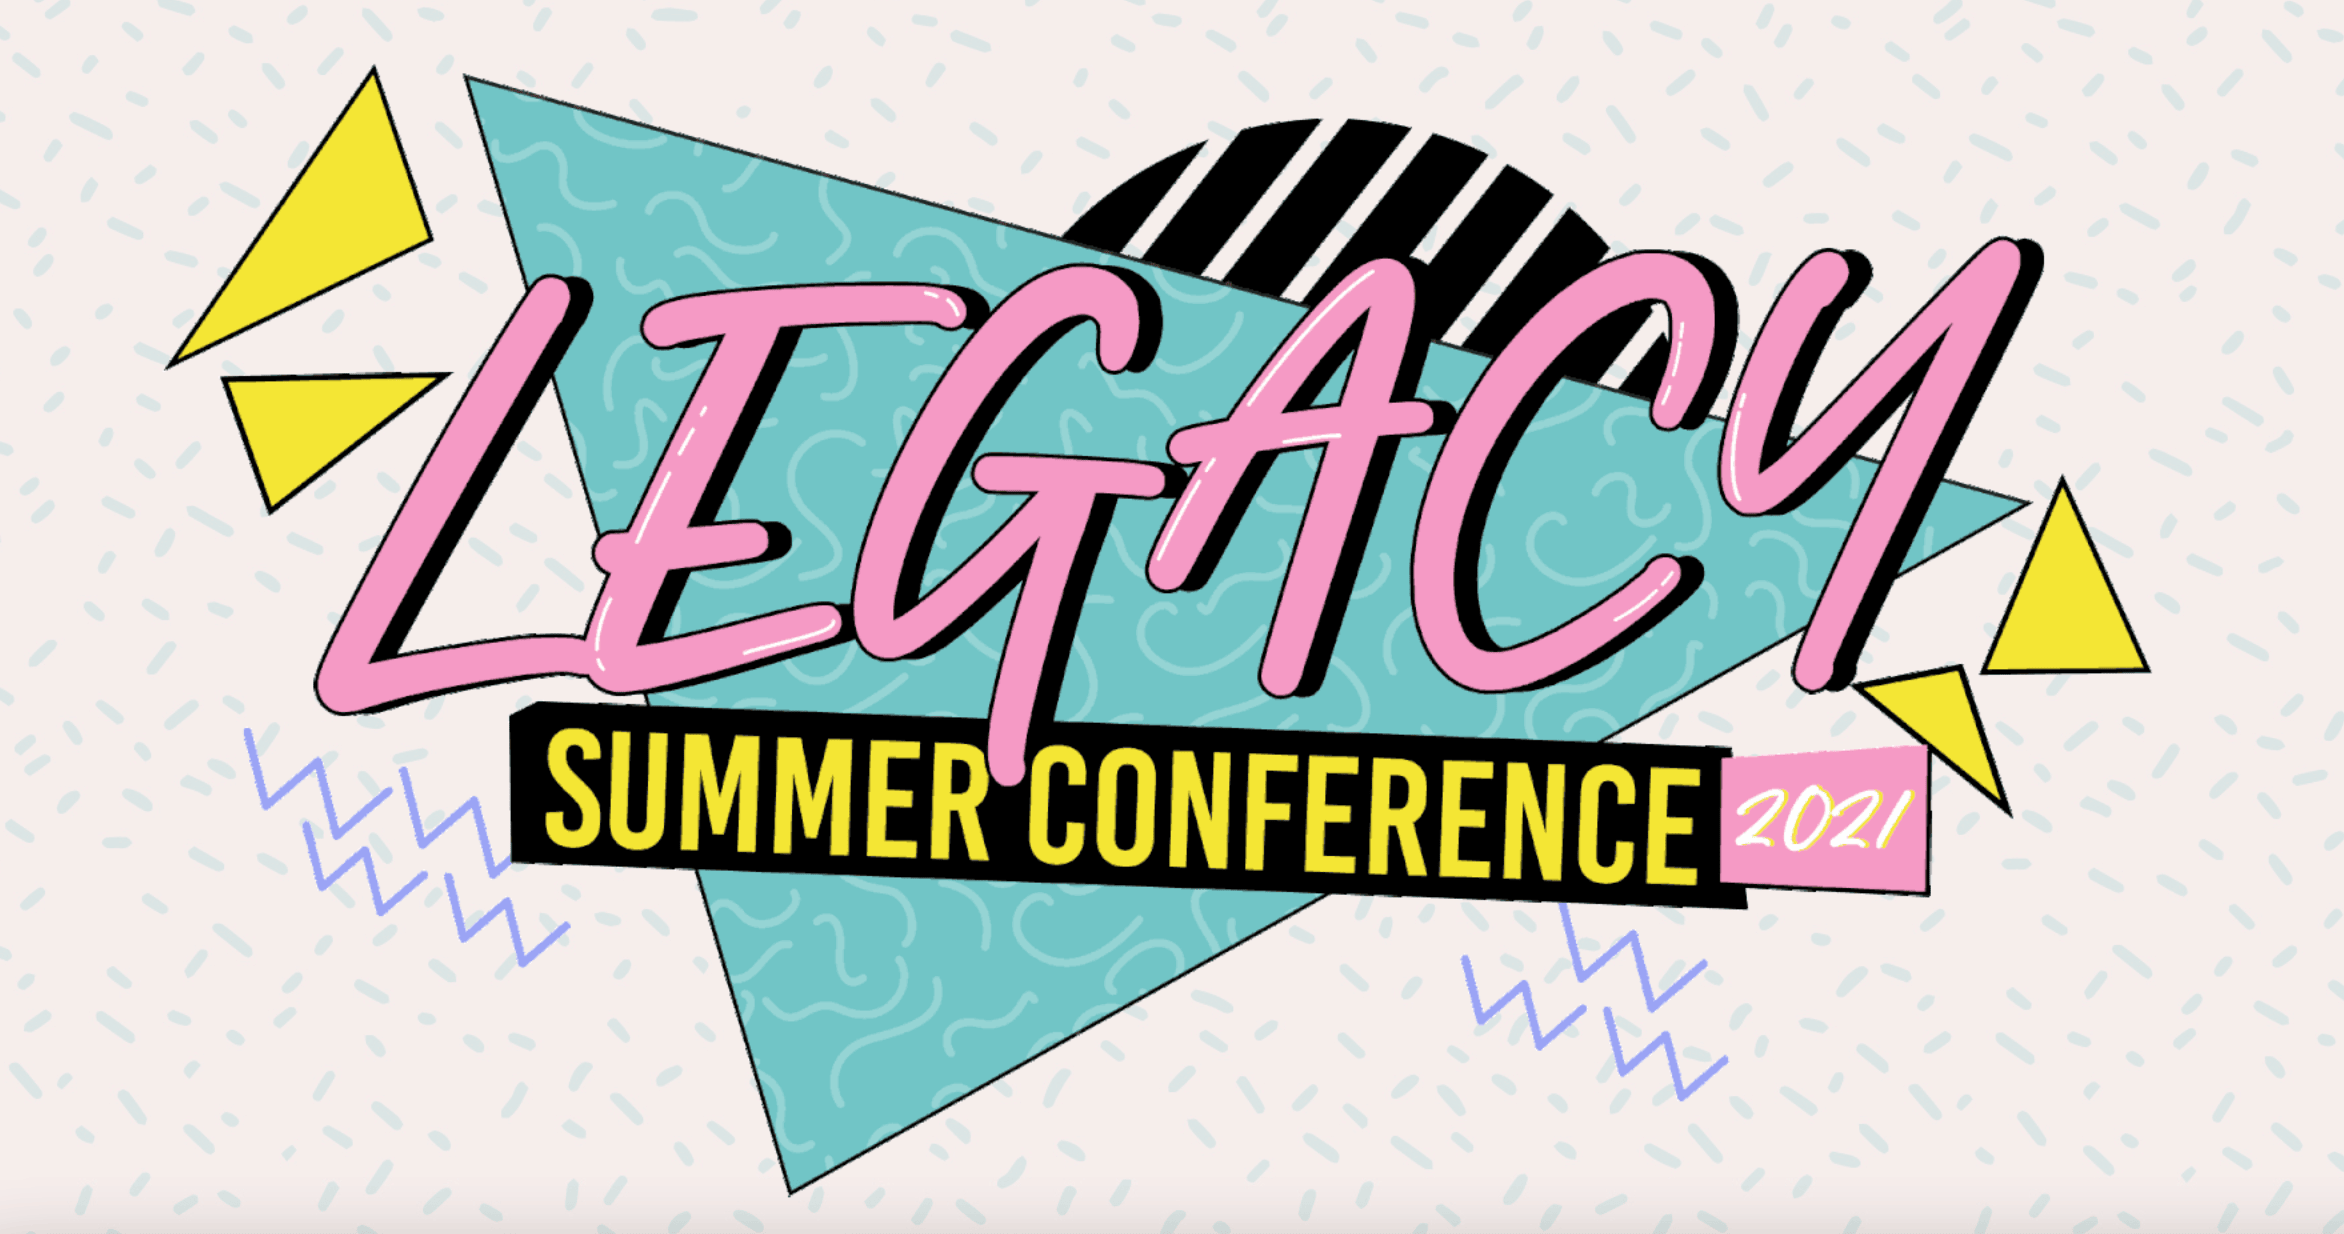 Legacy Summer Conference hosted by 7 Hills Church saw over 500 students in attendance, with 78 of them making the decision to follow Christ